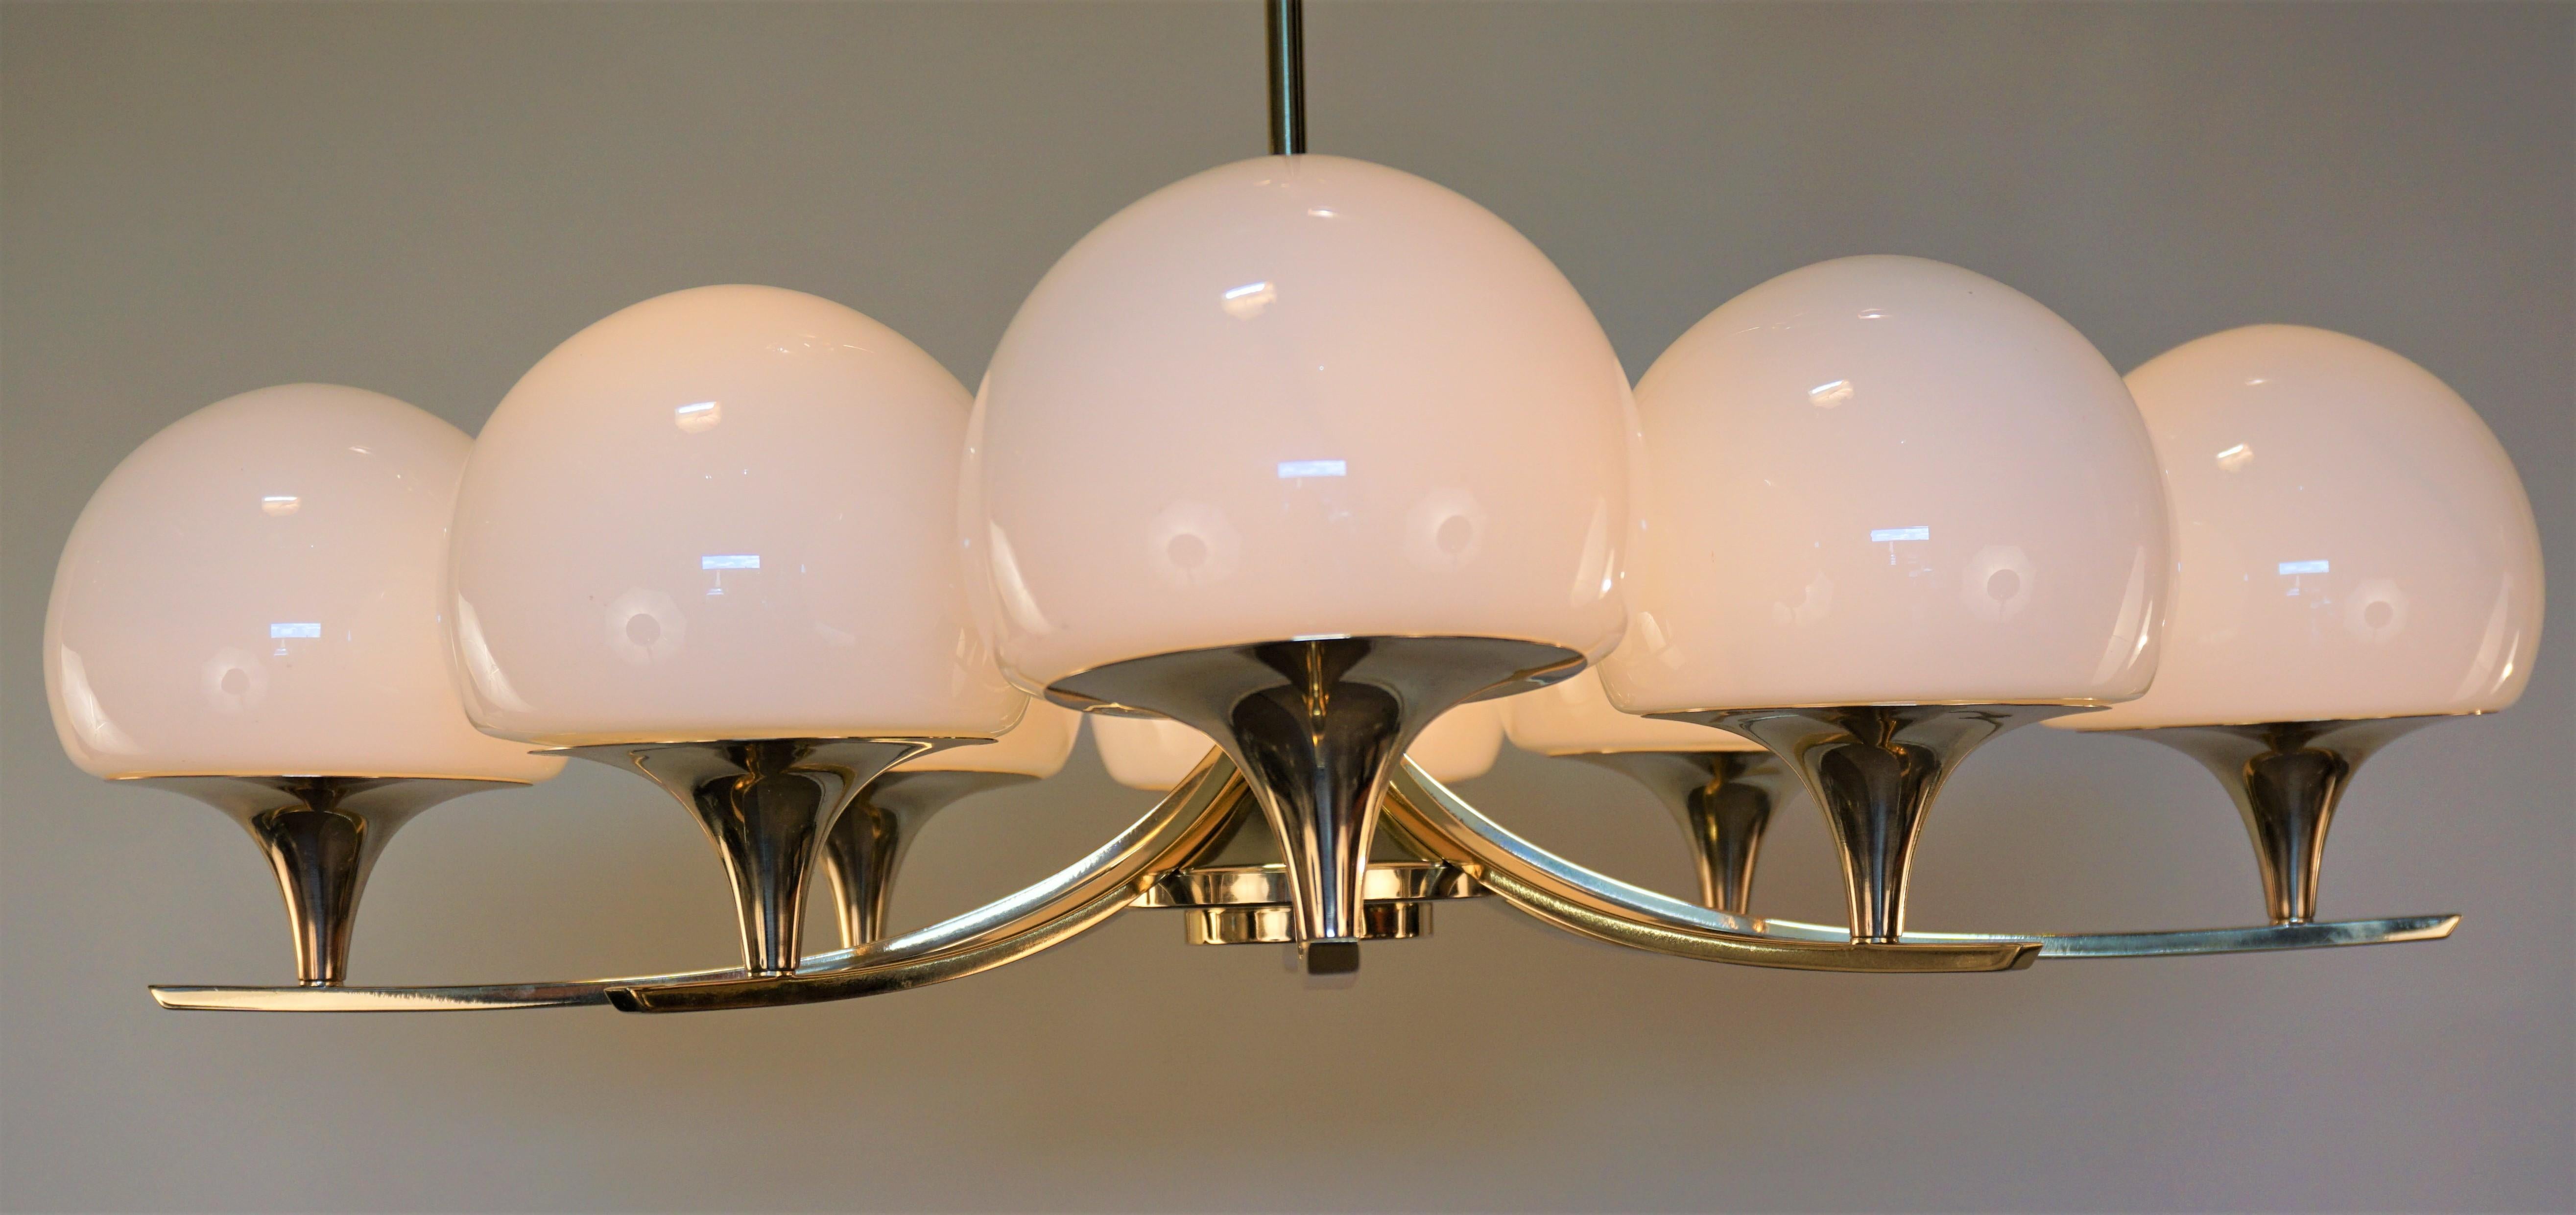 Simple but elegant eight-light polished bronze and opal glass chandelier.